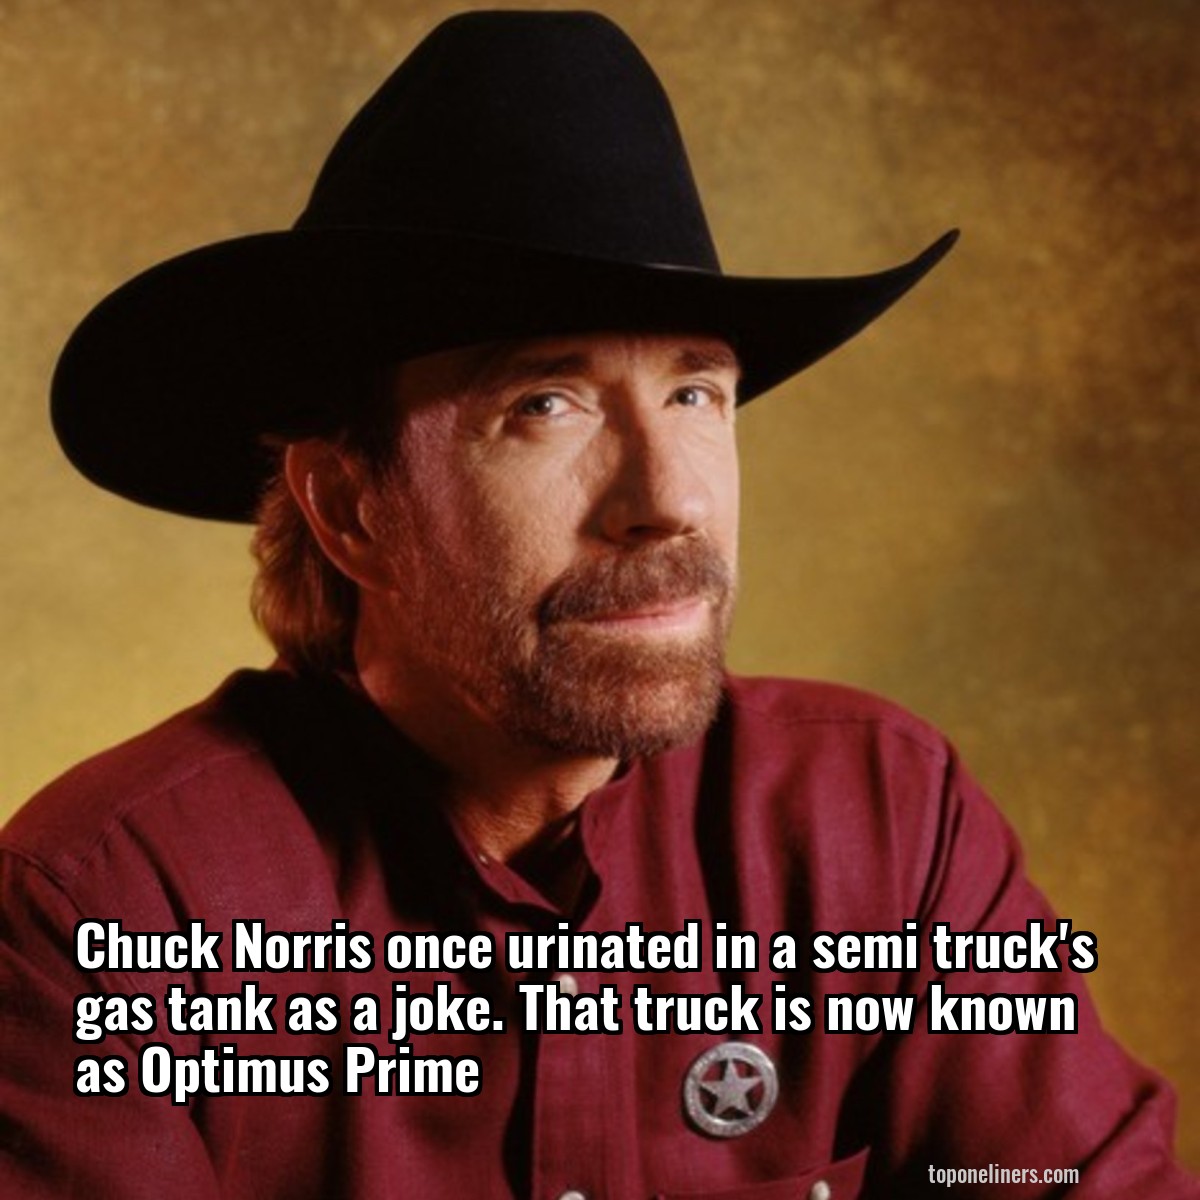 Chuck Norris once urinated in a semi truck's gas tank as a joke. That truck is now known as Optimus Prime